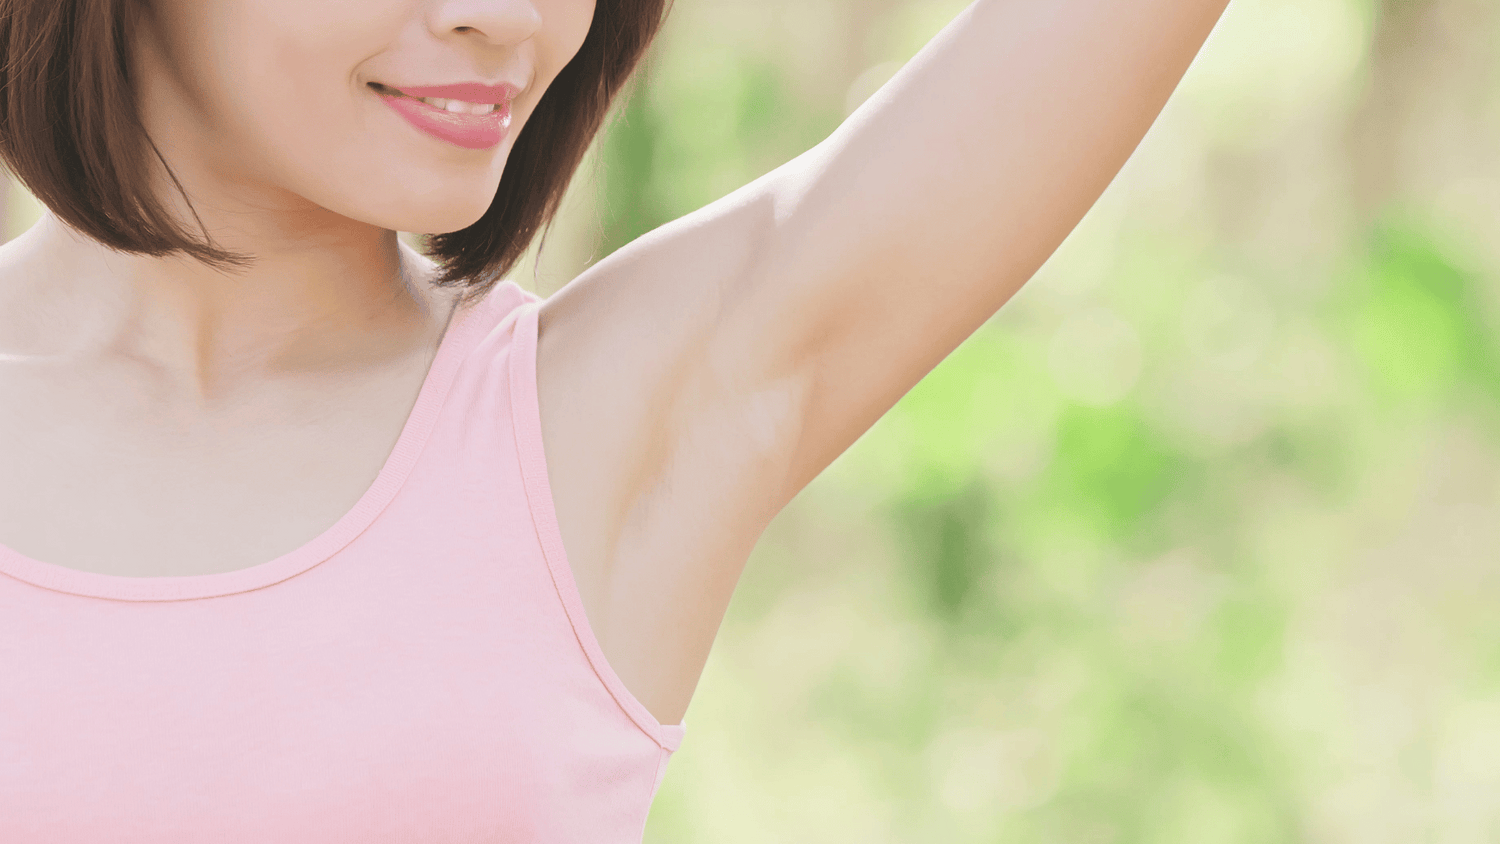 The major problem with bleached armpits, Lifestyle